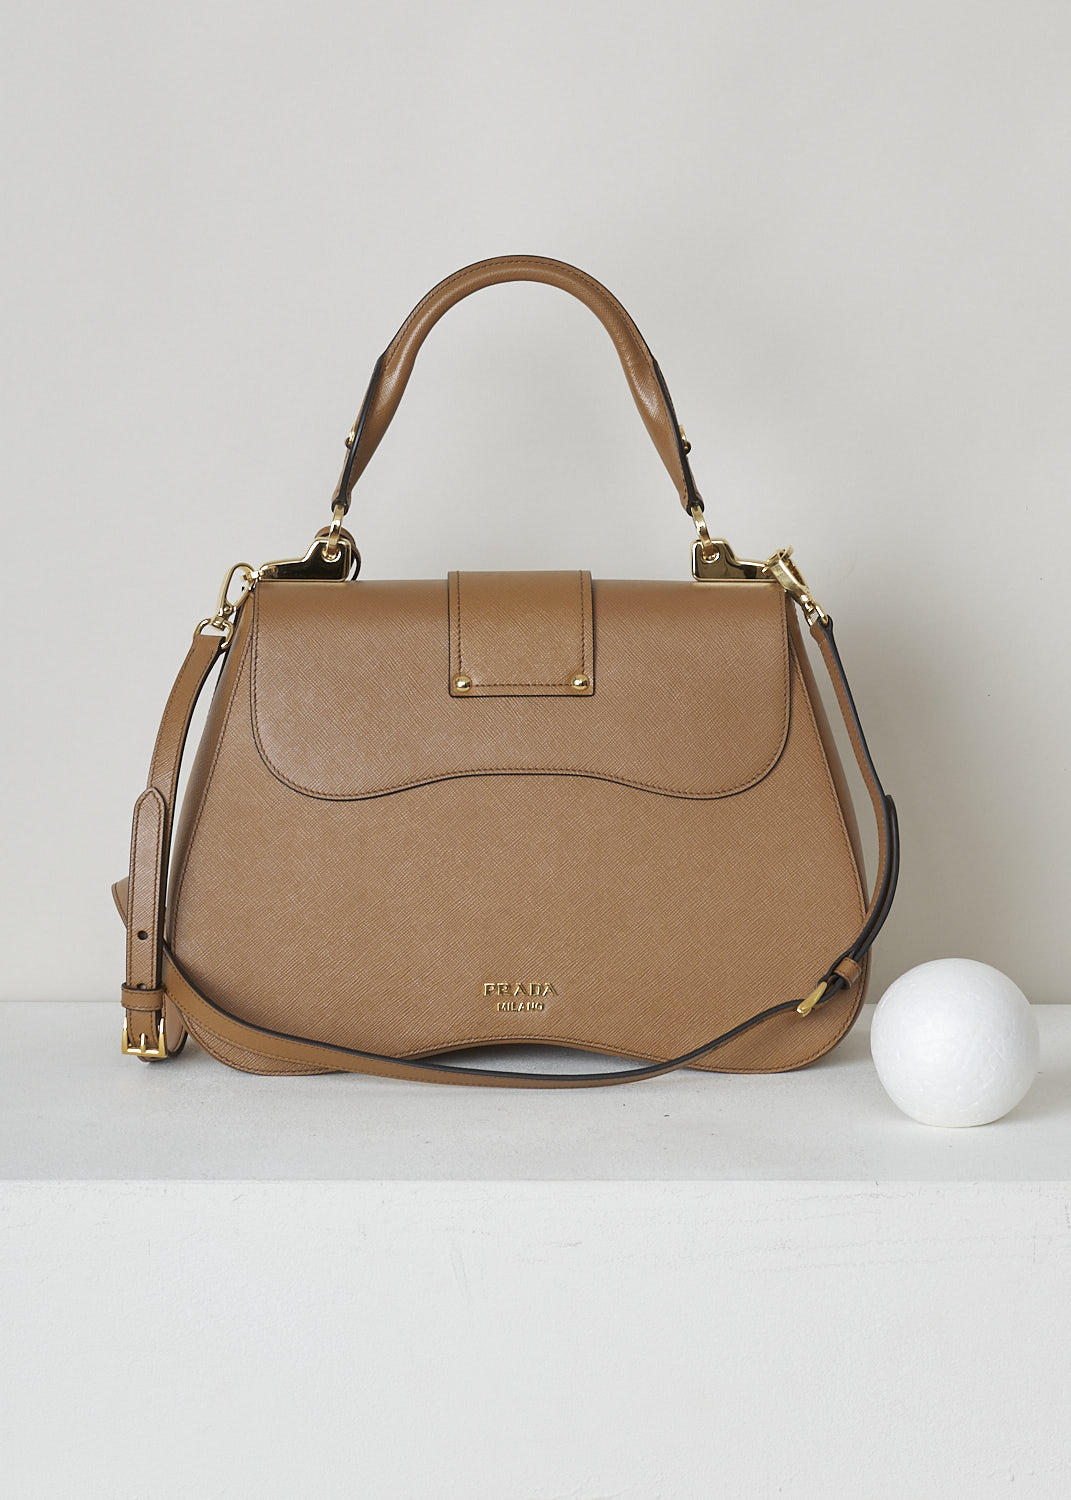 PRADA, CARAMEL BROWN SIDONIE TOP HANDLE BAG, CARTELLA_1BN002_F098L_CARAMEL, Brown, Back, This large caramel brown Sidonie Top Handle Bag is made with Saffiano leather. The bag comes with a leather handle and an adjustable and detachable shoulder strap. The bag has gold-tone metal hardware with the brand's logo on the back. The removable leather keychain has that same gold-tone logo on it. The slip-through closure opens up to reveal its red interior. The bag has a single, spacious compartment with a zipped inner pocket to one side and a patch pocket on the other side.   
